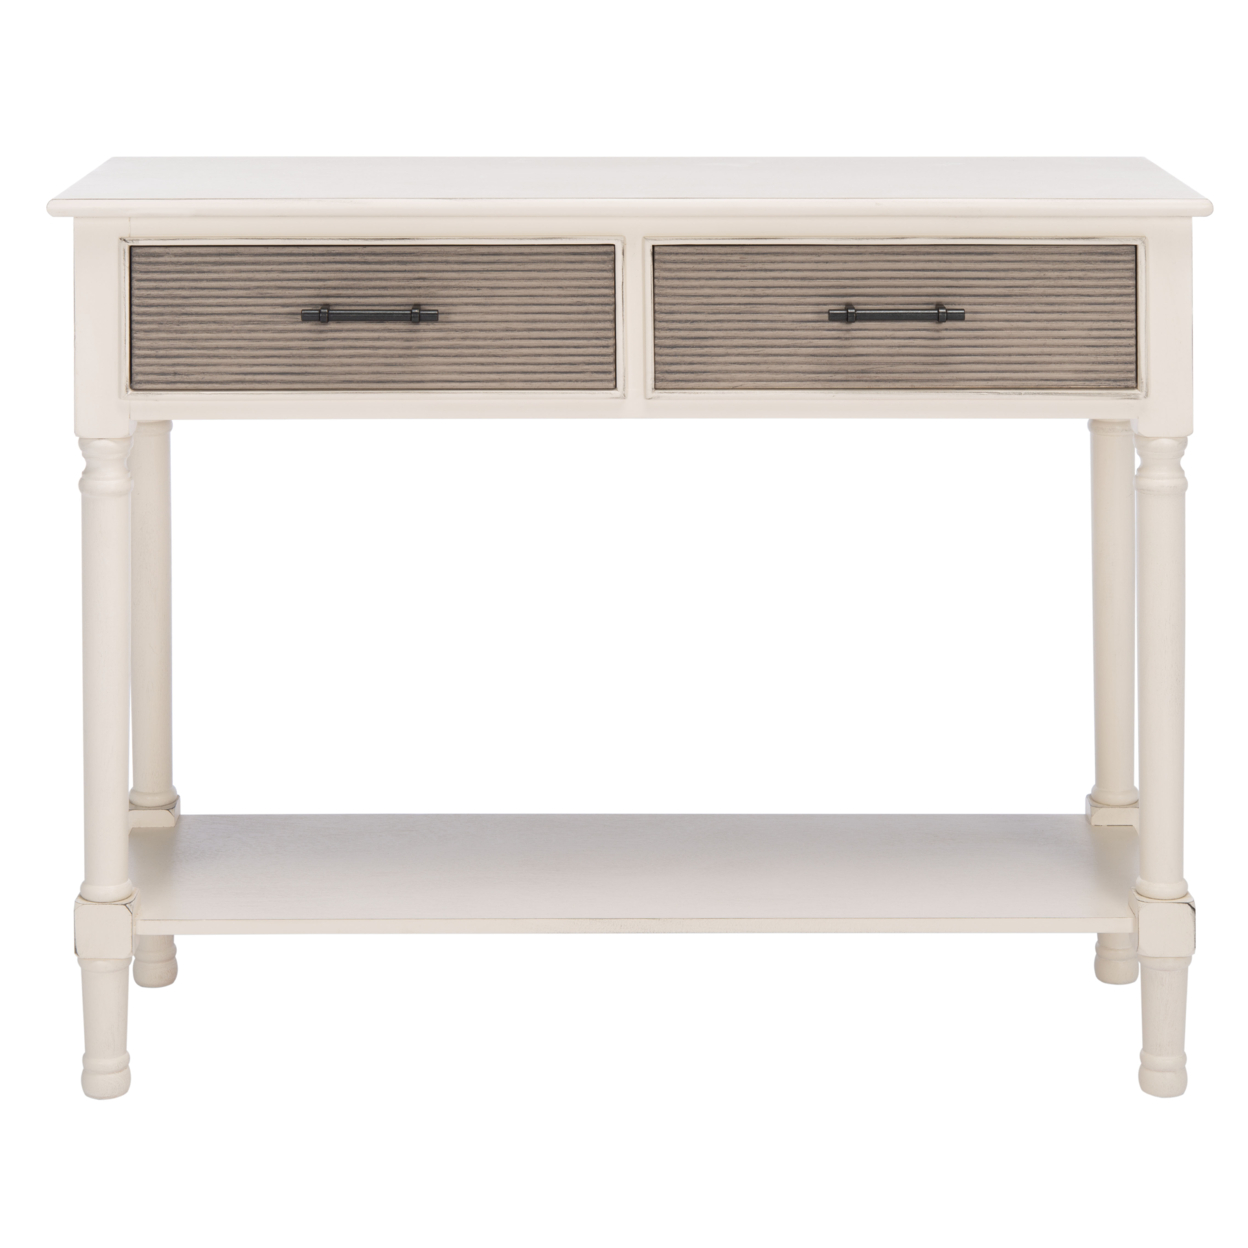 SAFAVIEH Ryder 2-Drawer Console Table Distressed White / Greige